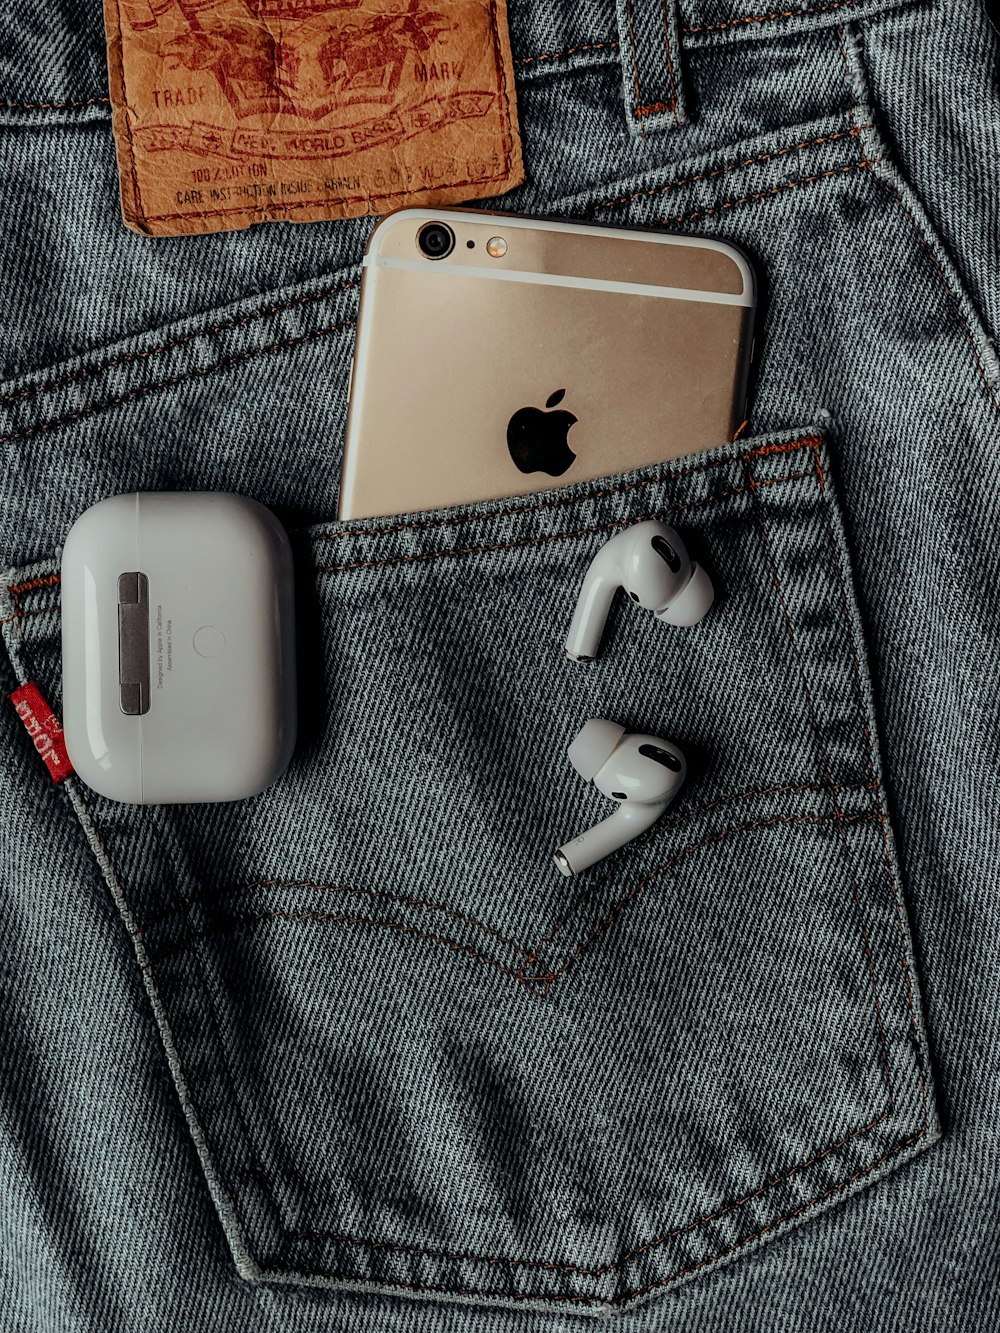 AirPods Apple bianchi su iPhone 6 argento